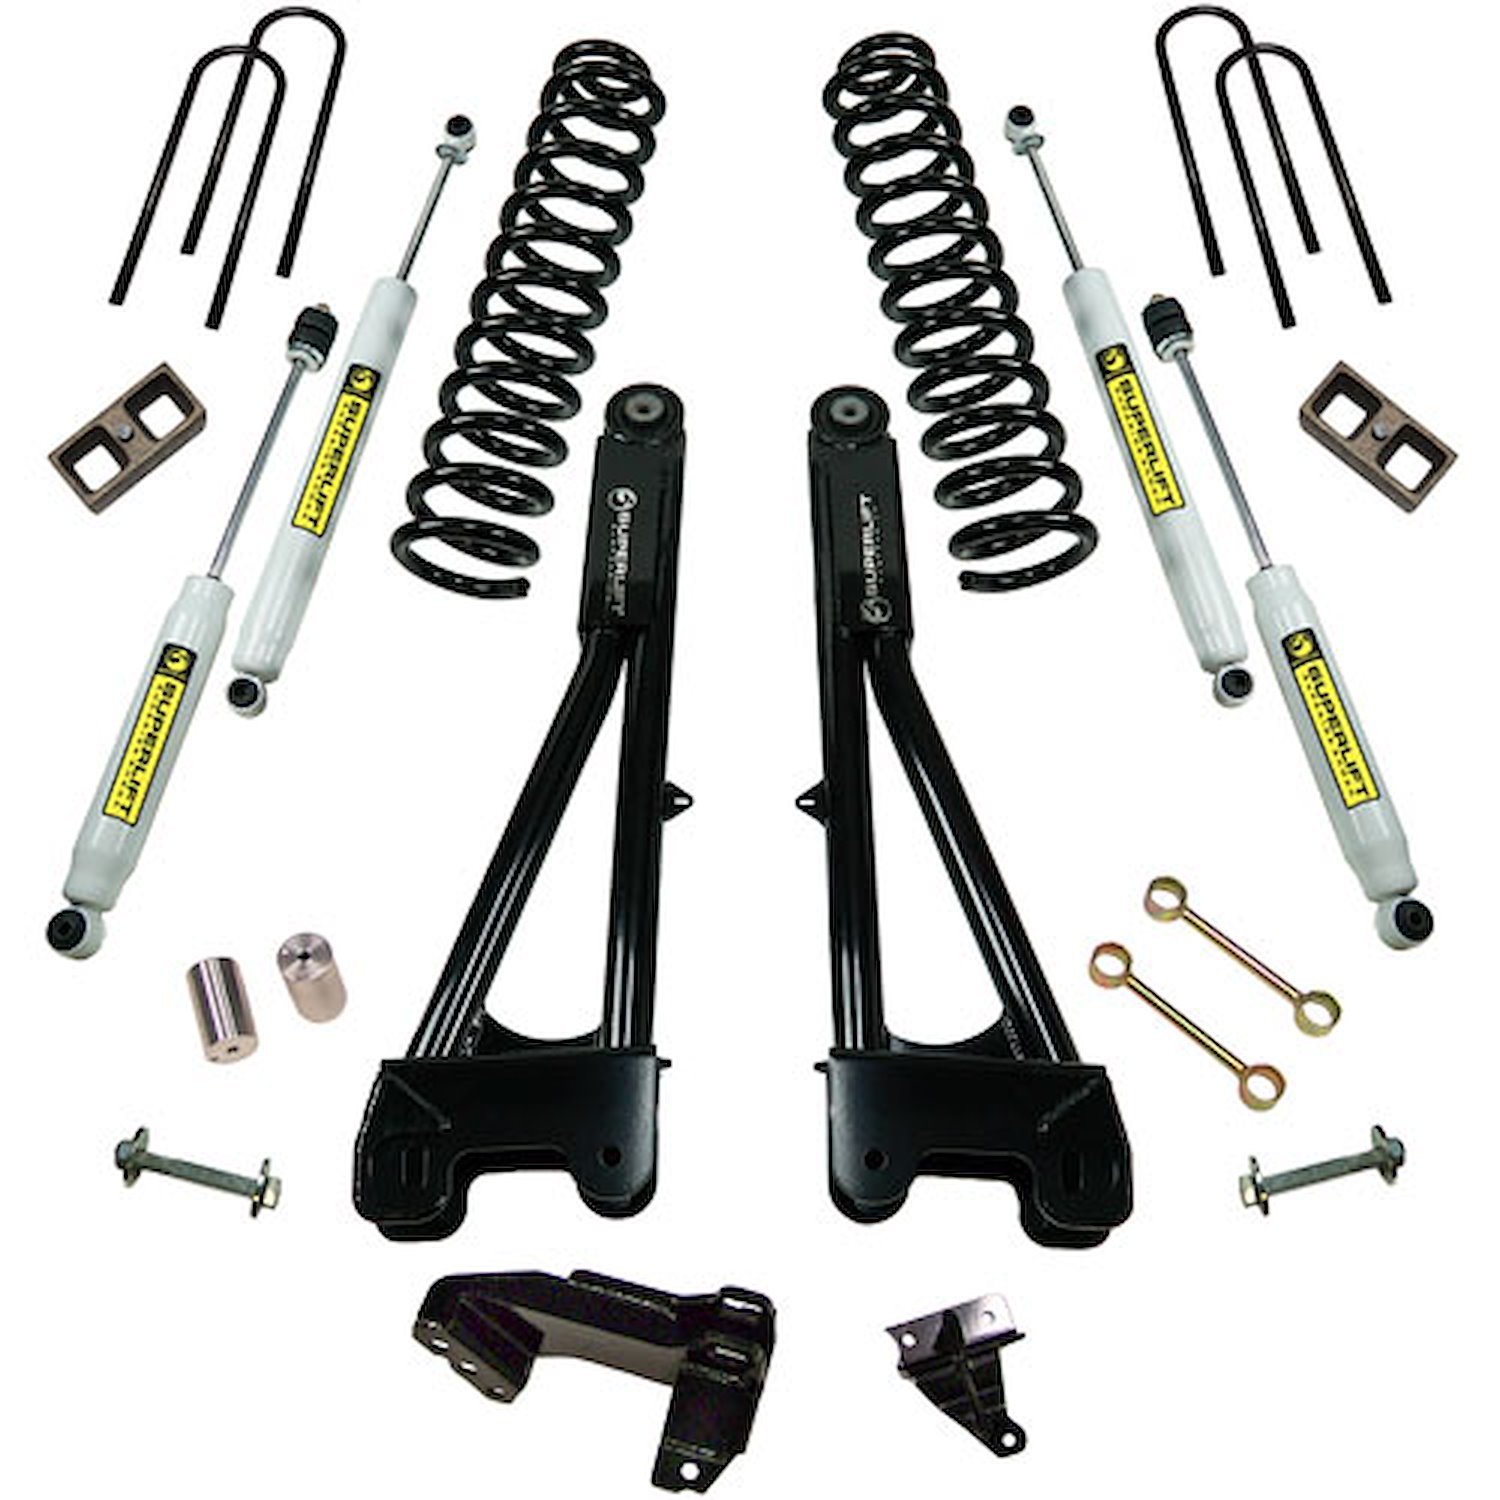 Suspension Lift Kit 2008-10 Ford F250 and F350 4WD models